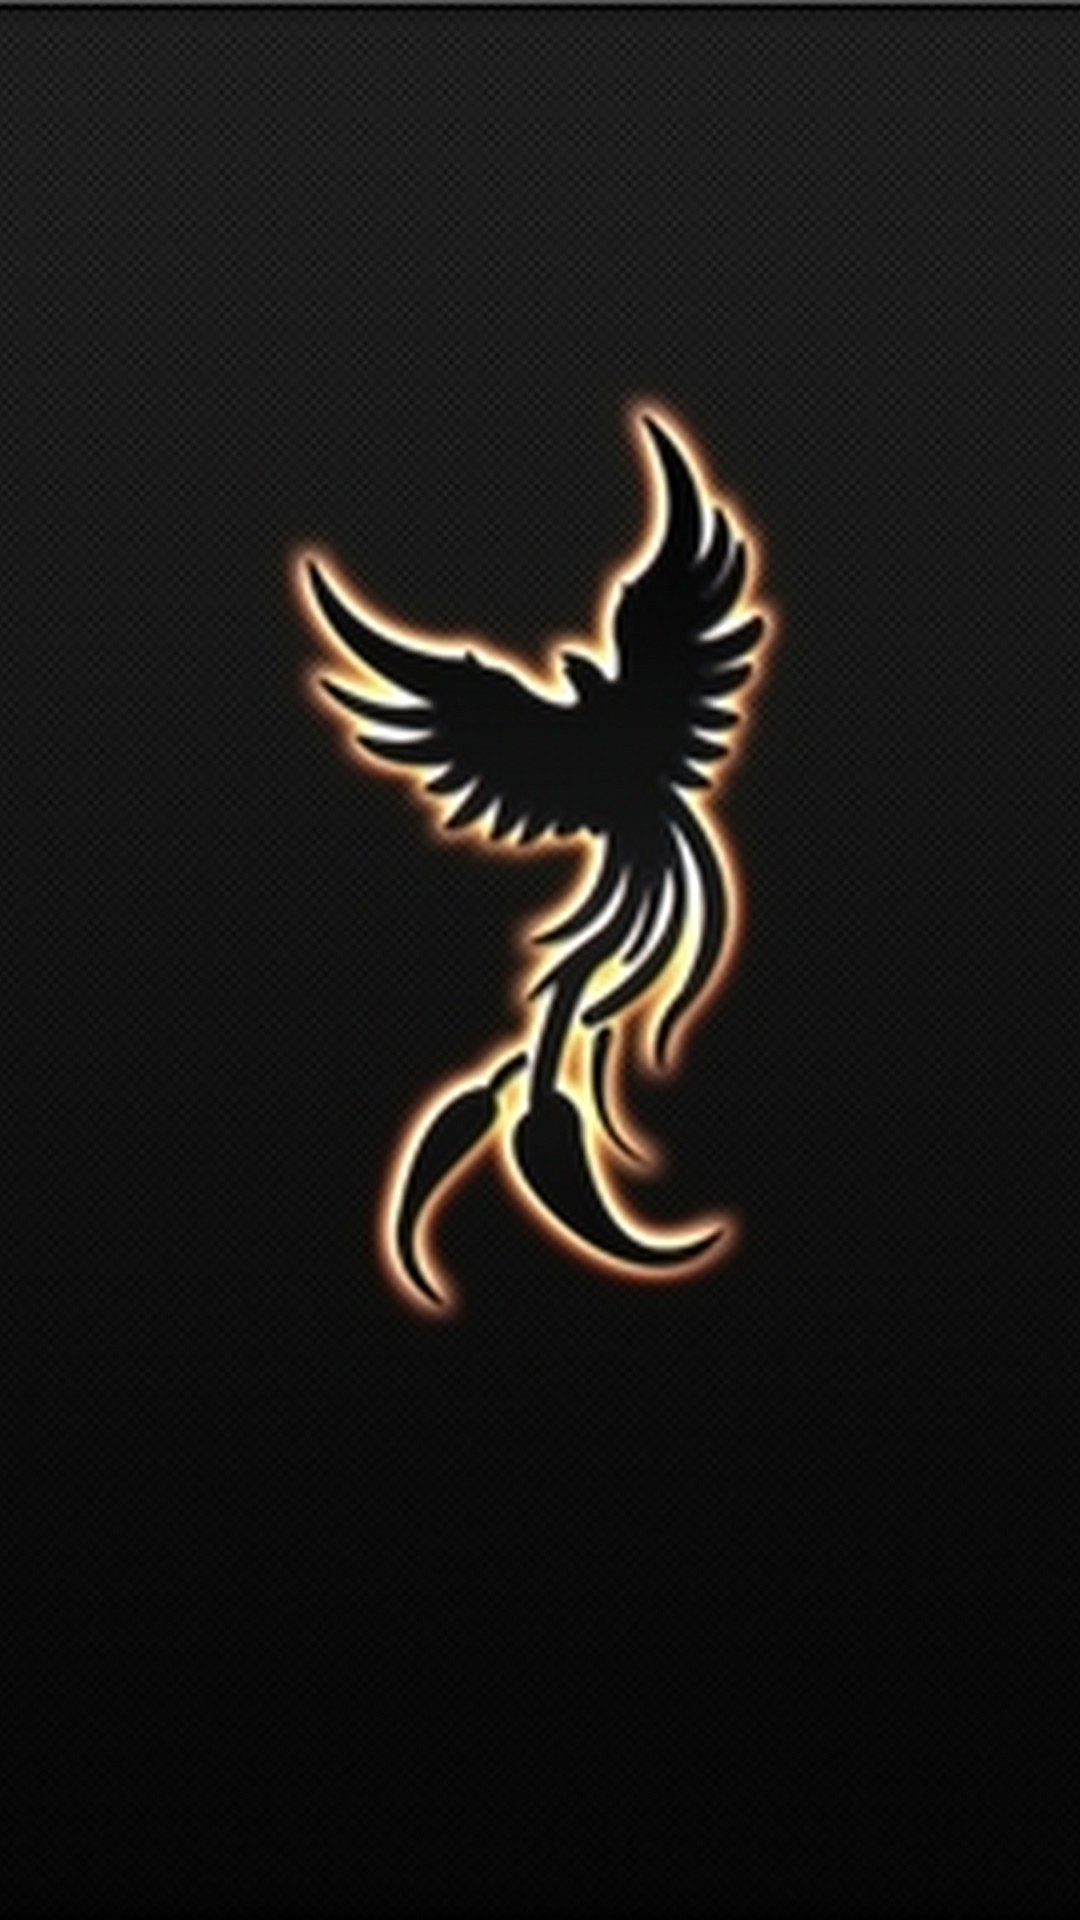 Phoenix Bird Images Wallpaper For Android with image resolution 1080x1920 pixel. You can make this wallpaper for your Android backgrounds, Tablet, Smartphones Screensavers and Mobile Phone Lock Screen